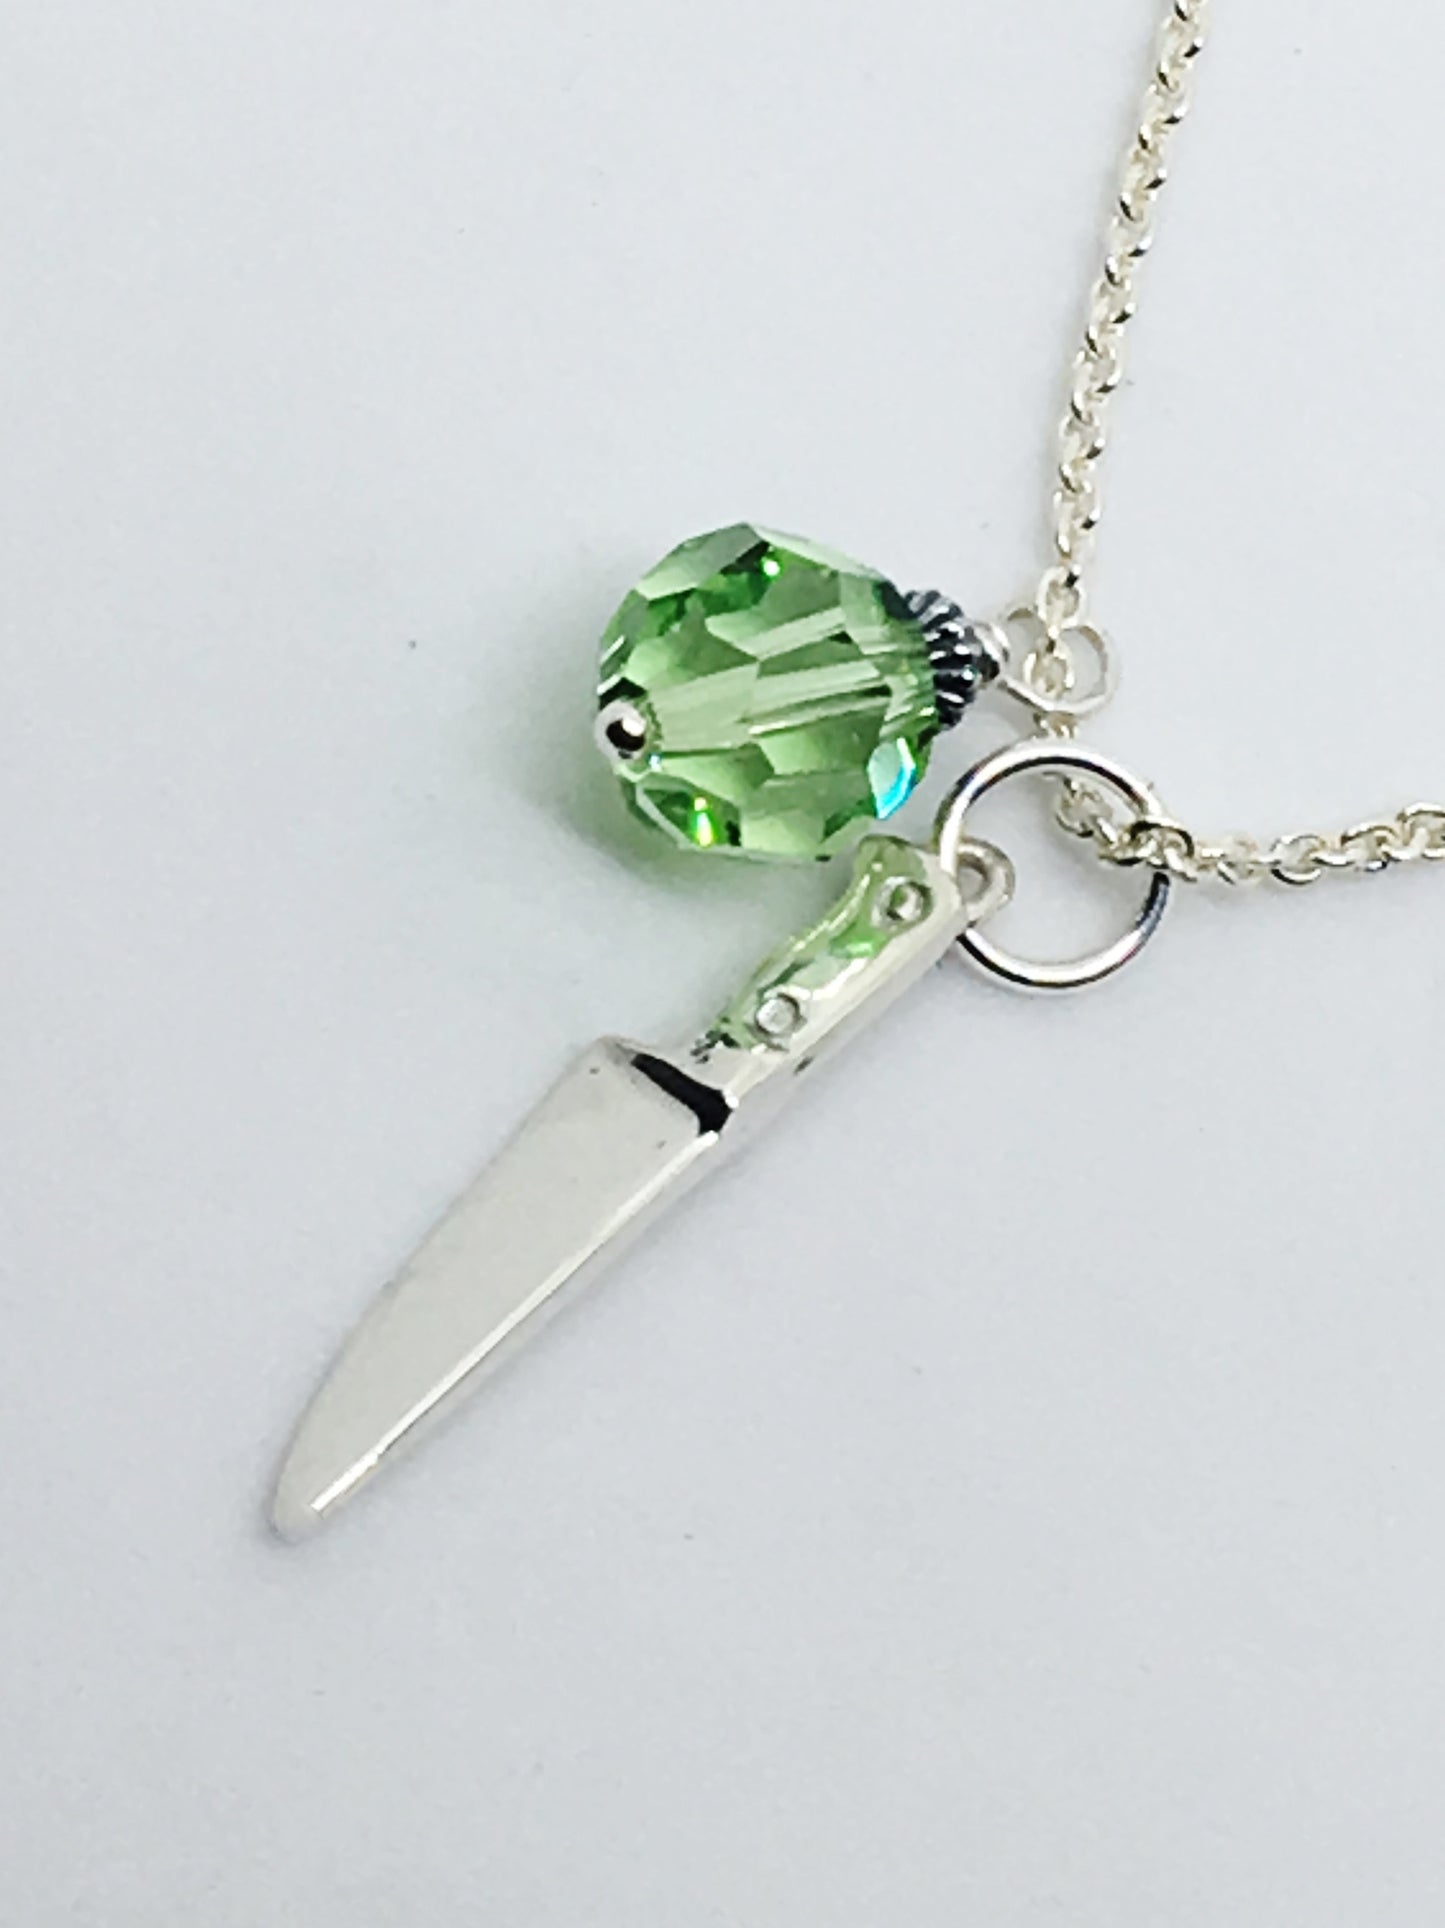 Chef's Knife Pendant Necklace with Green Swarovski Crystal Charm